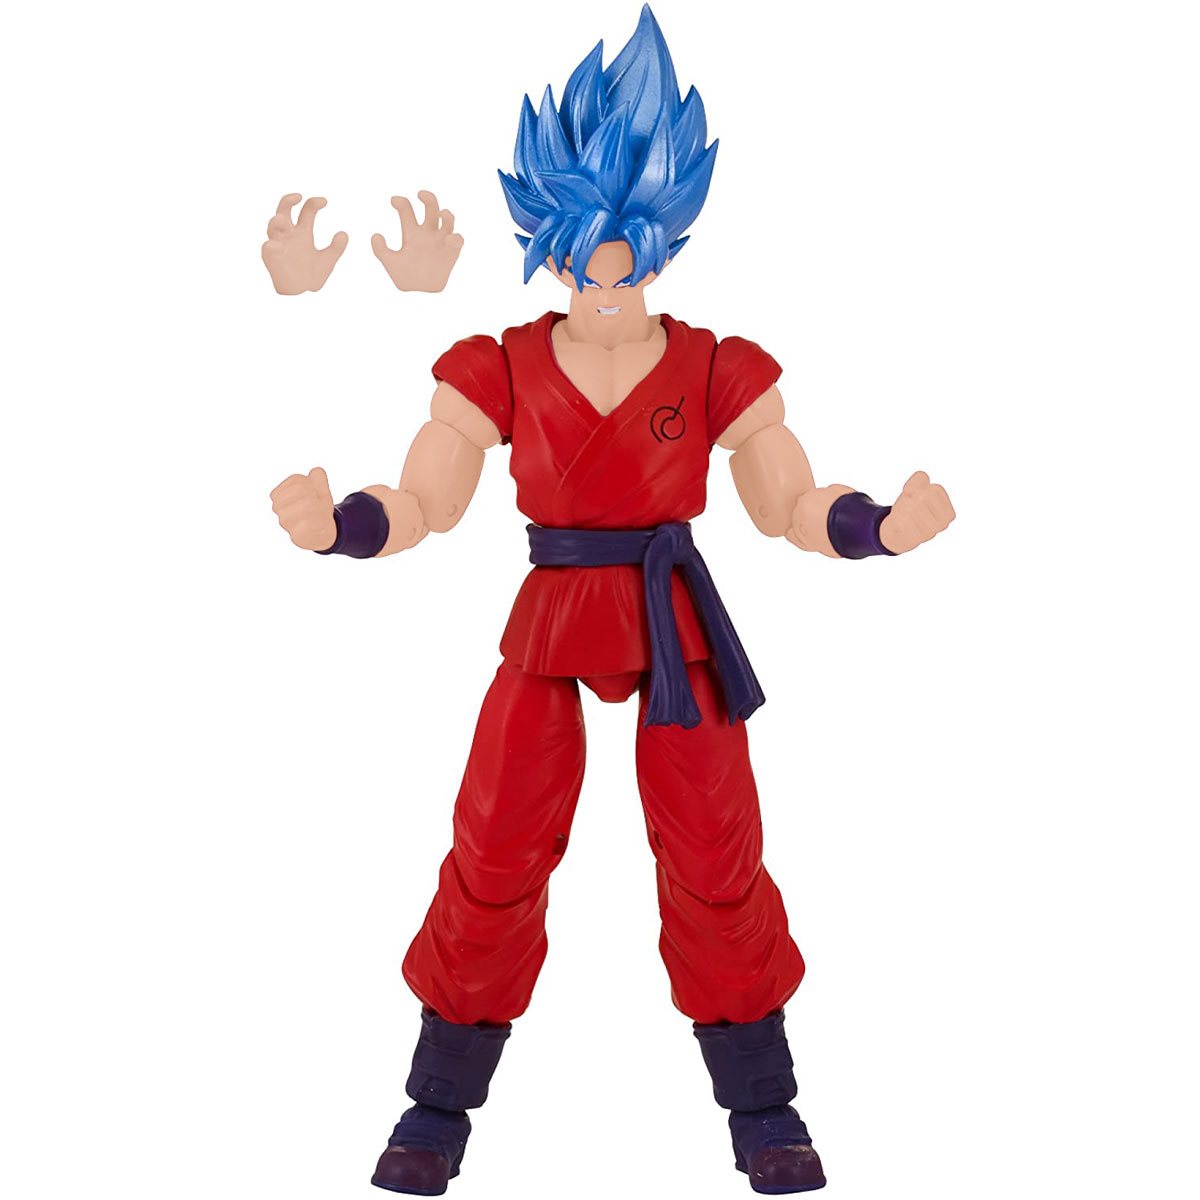 Goku action figure • Compare & find best prices today »